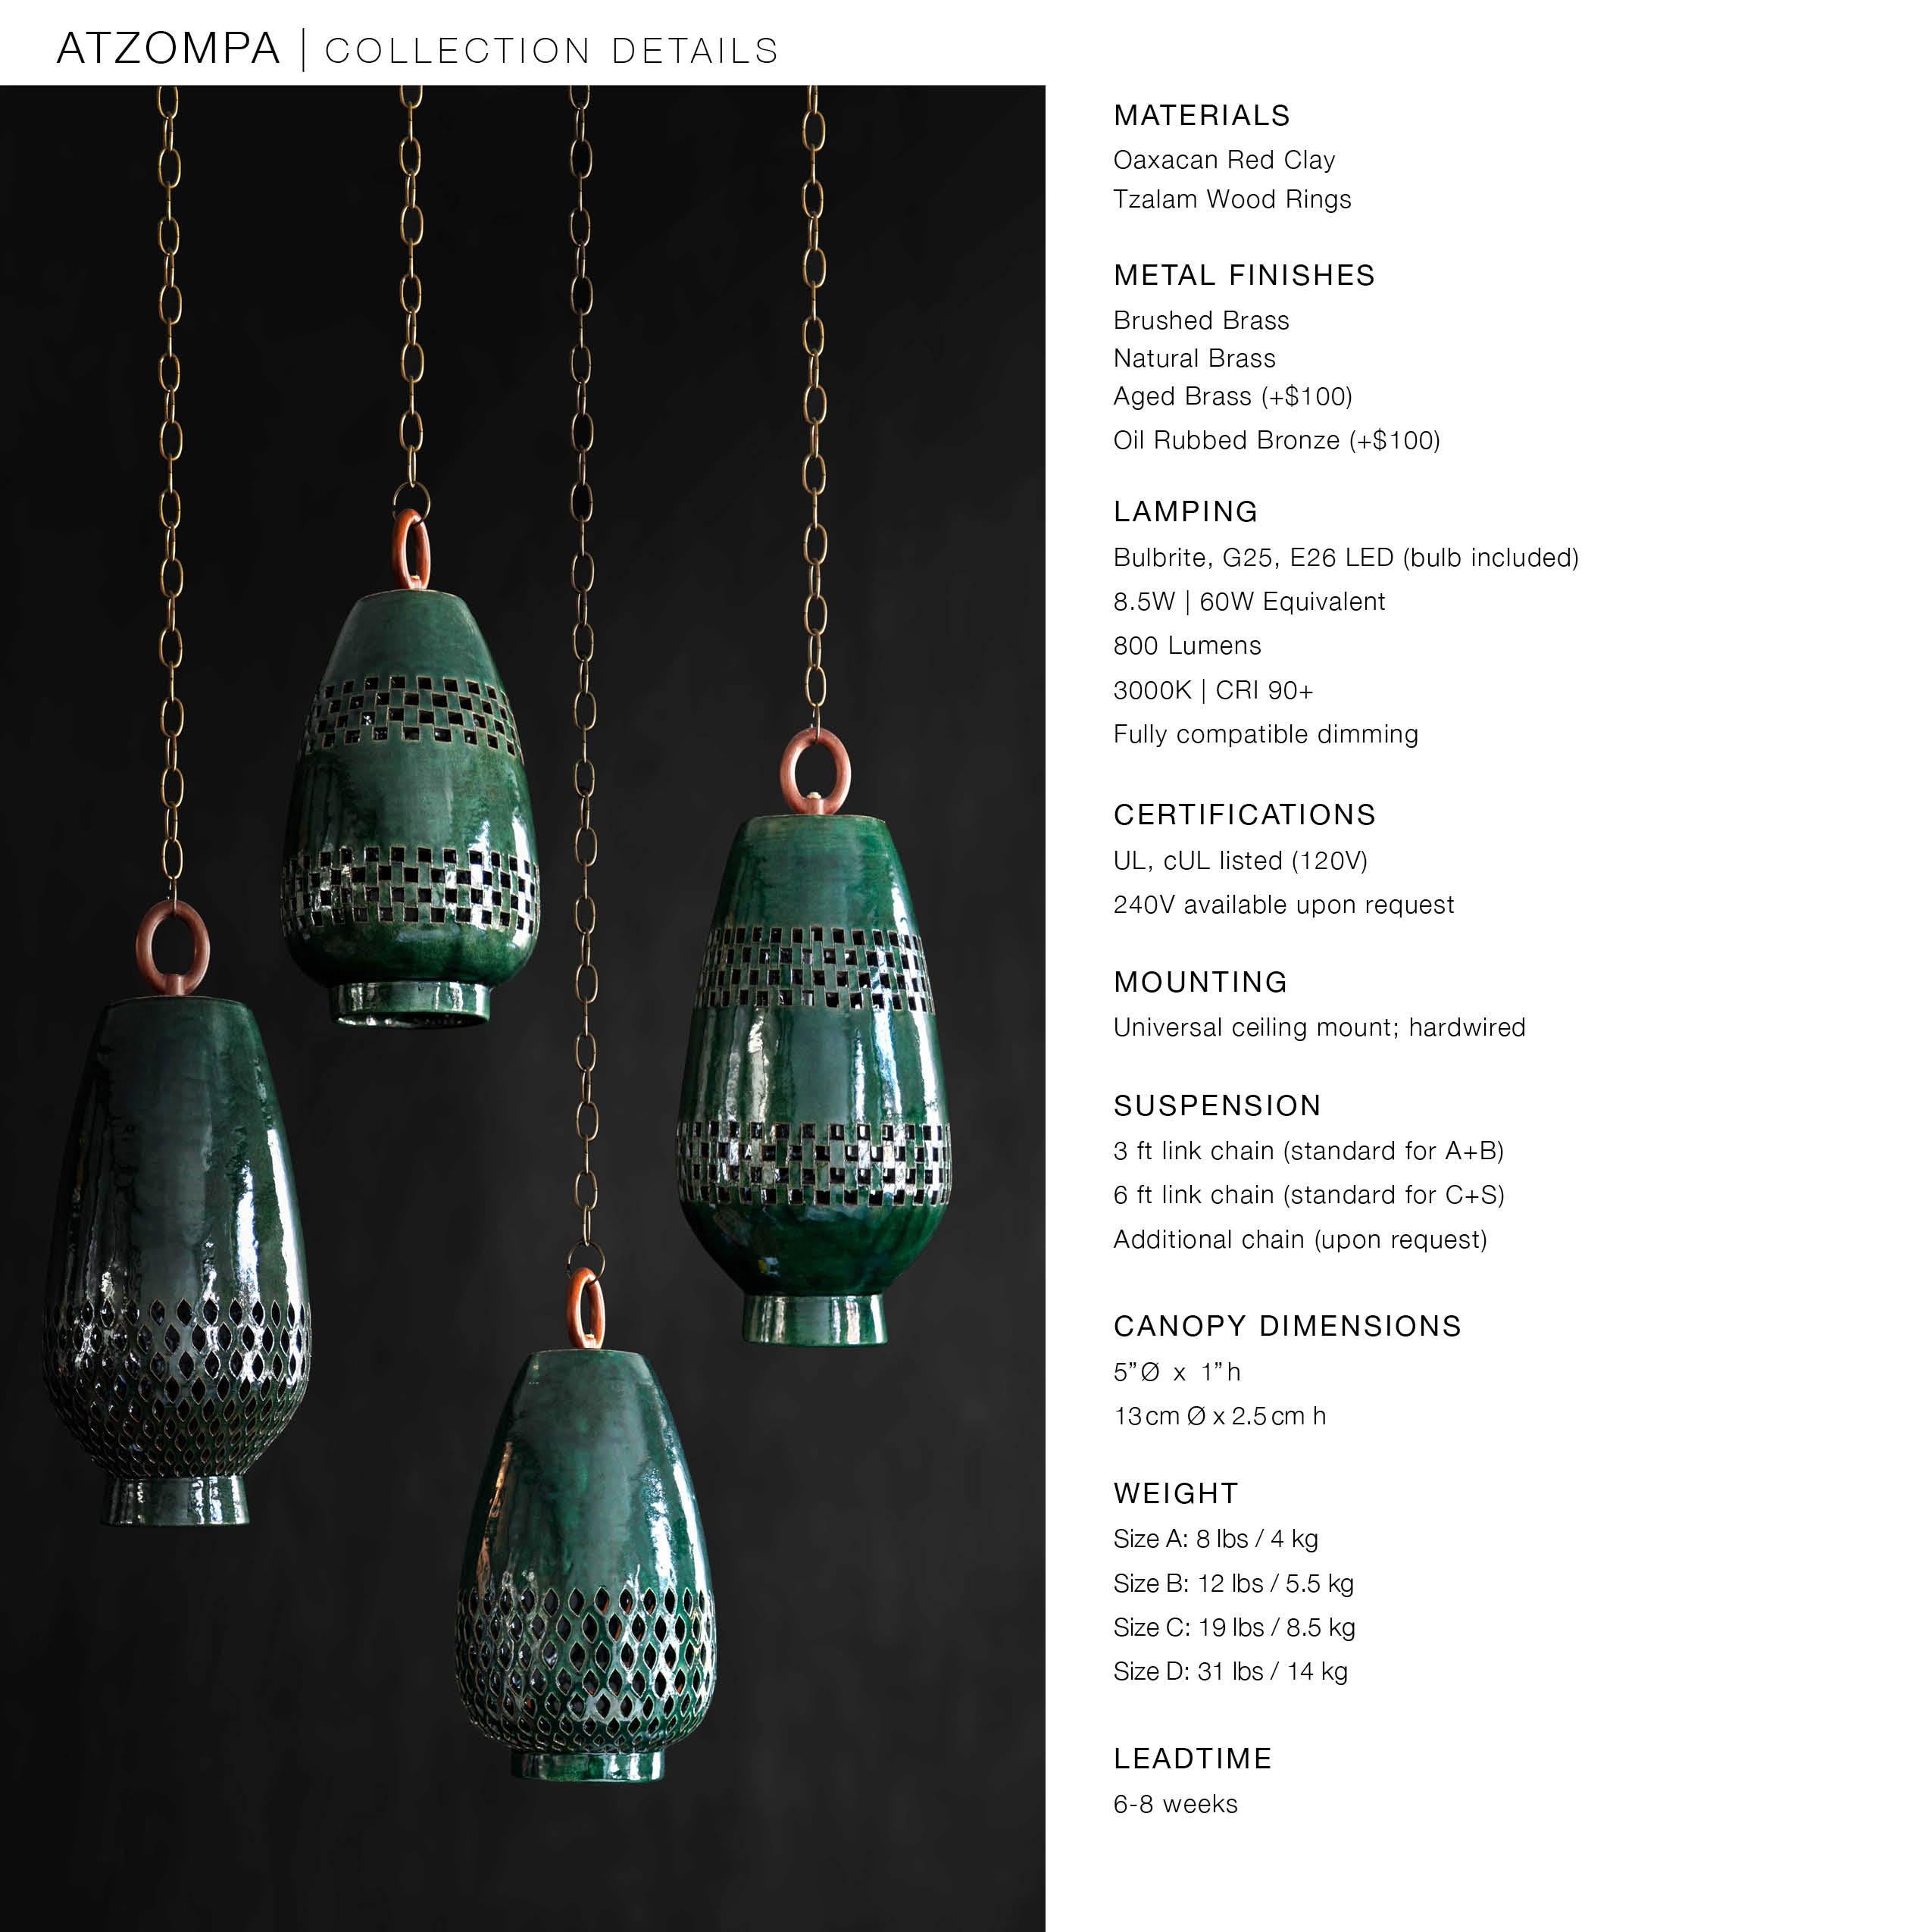 Emerald Ceramic Pendant Light XL, Brushed Brass, Ajedrez Atzompa Collection In New Condition For Sale In New York, NY